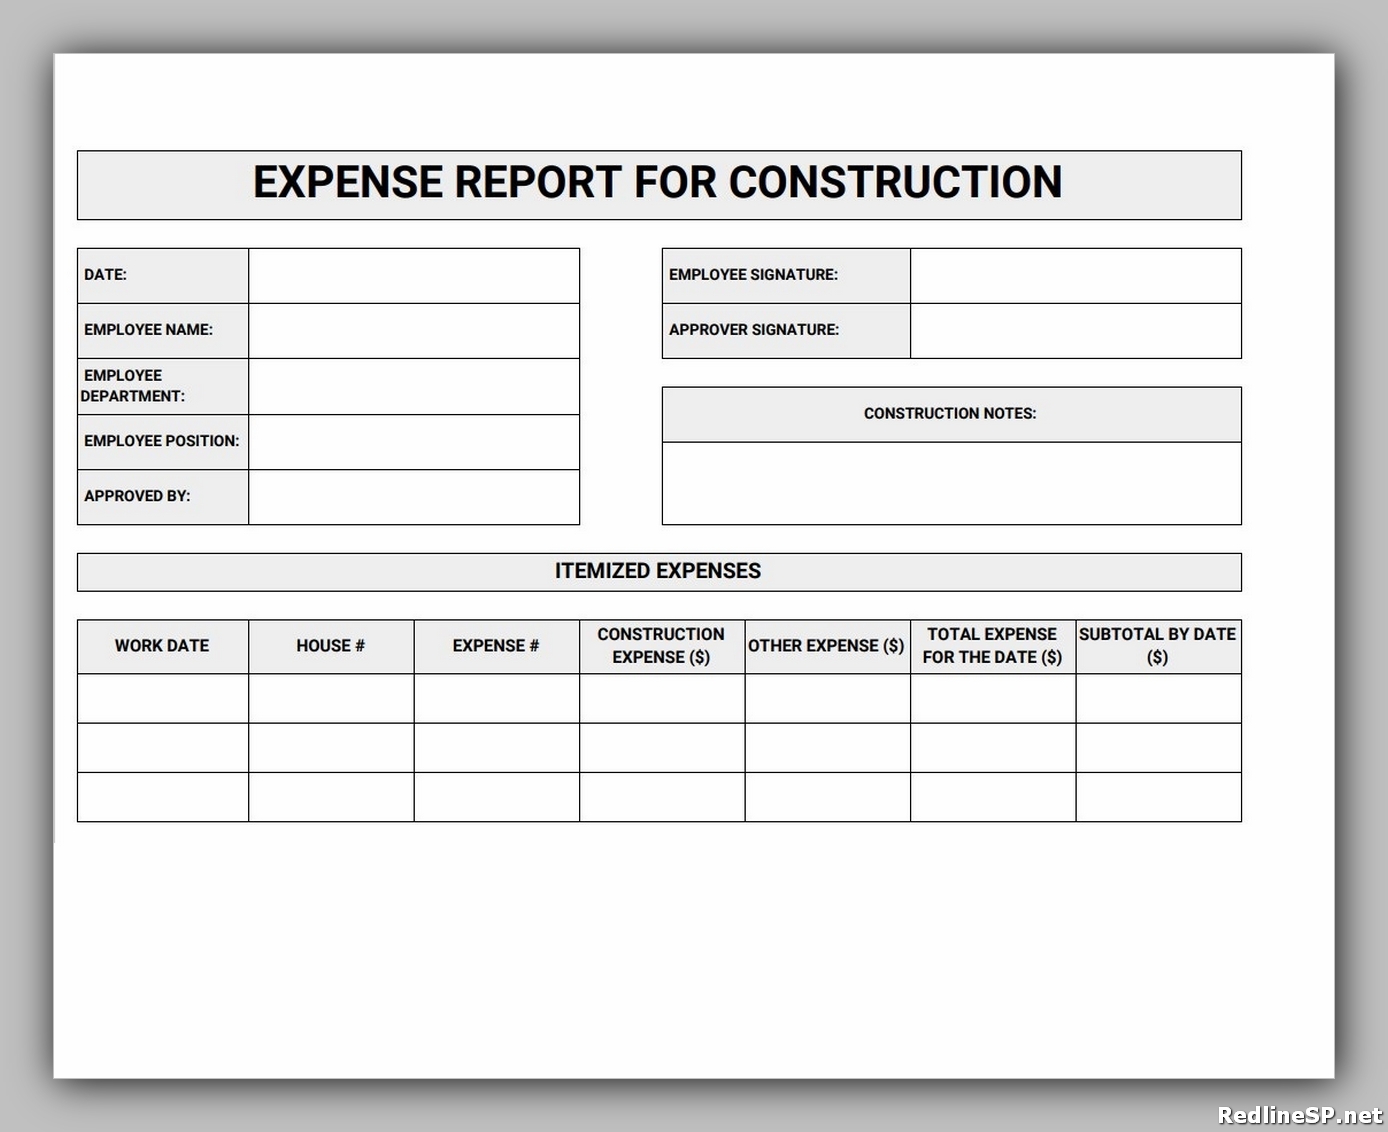 independent contractor travel expenses